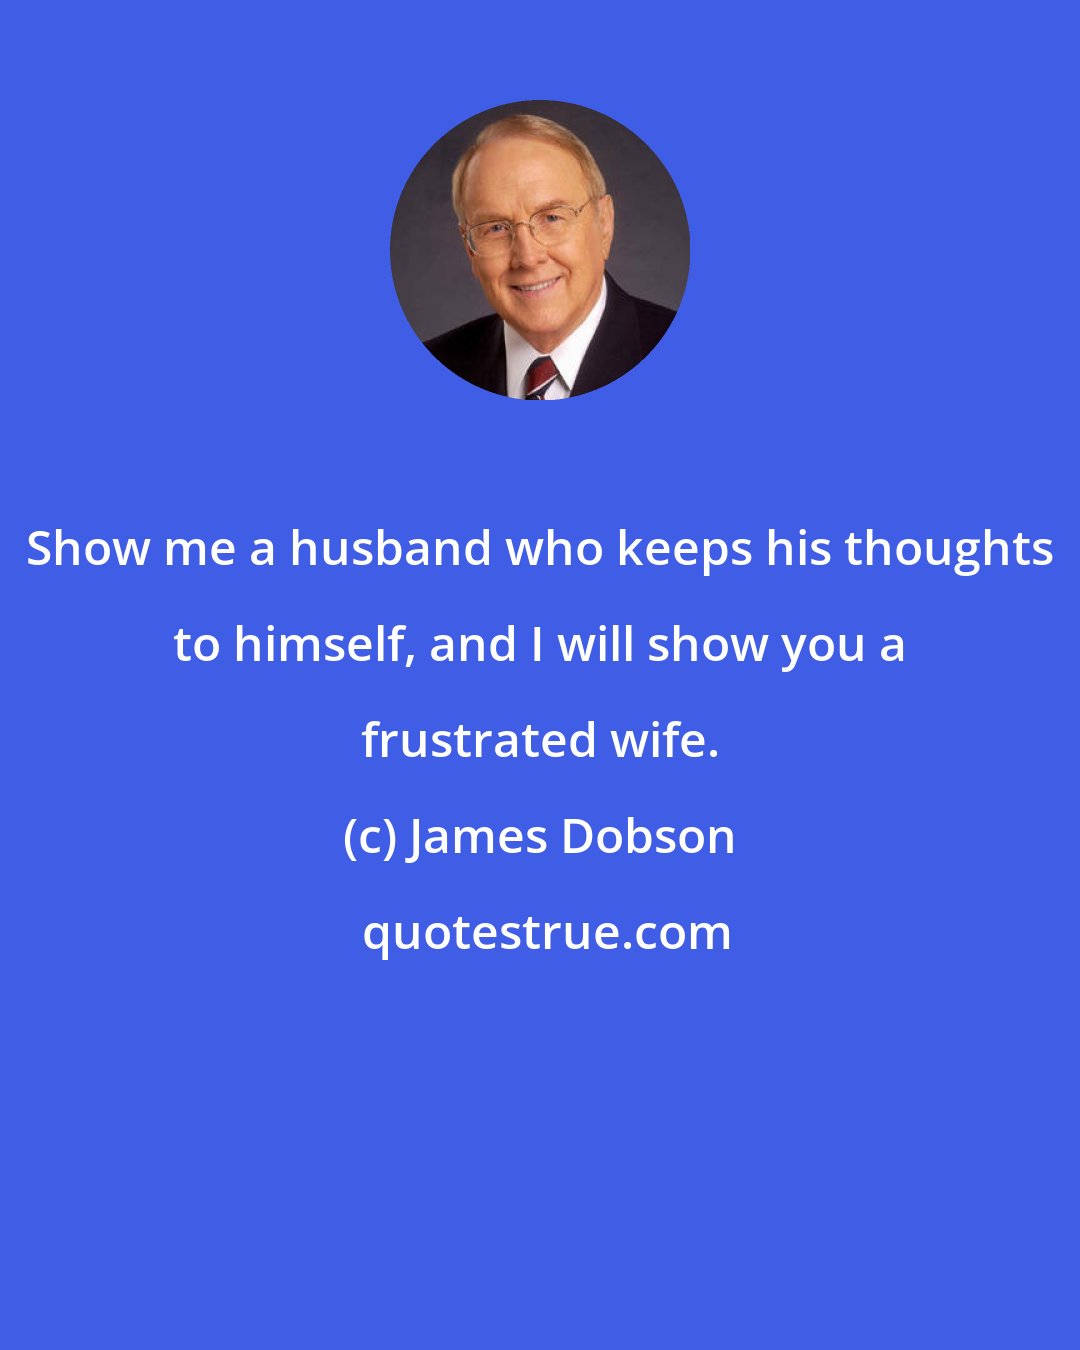 James Dobson: Show me a husband who keeps his thoughts to himself, and I will show you a frustrated wife.